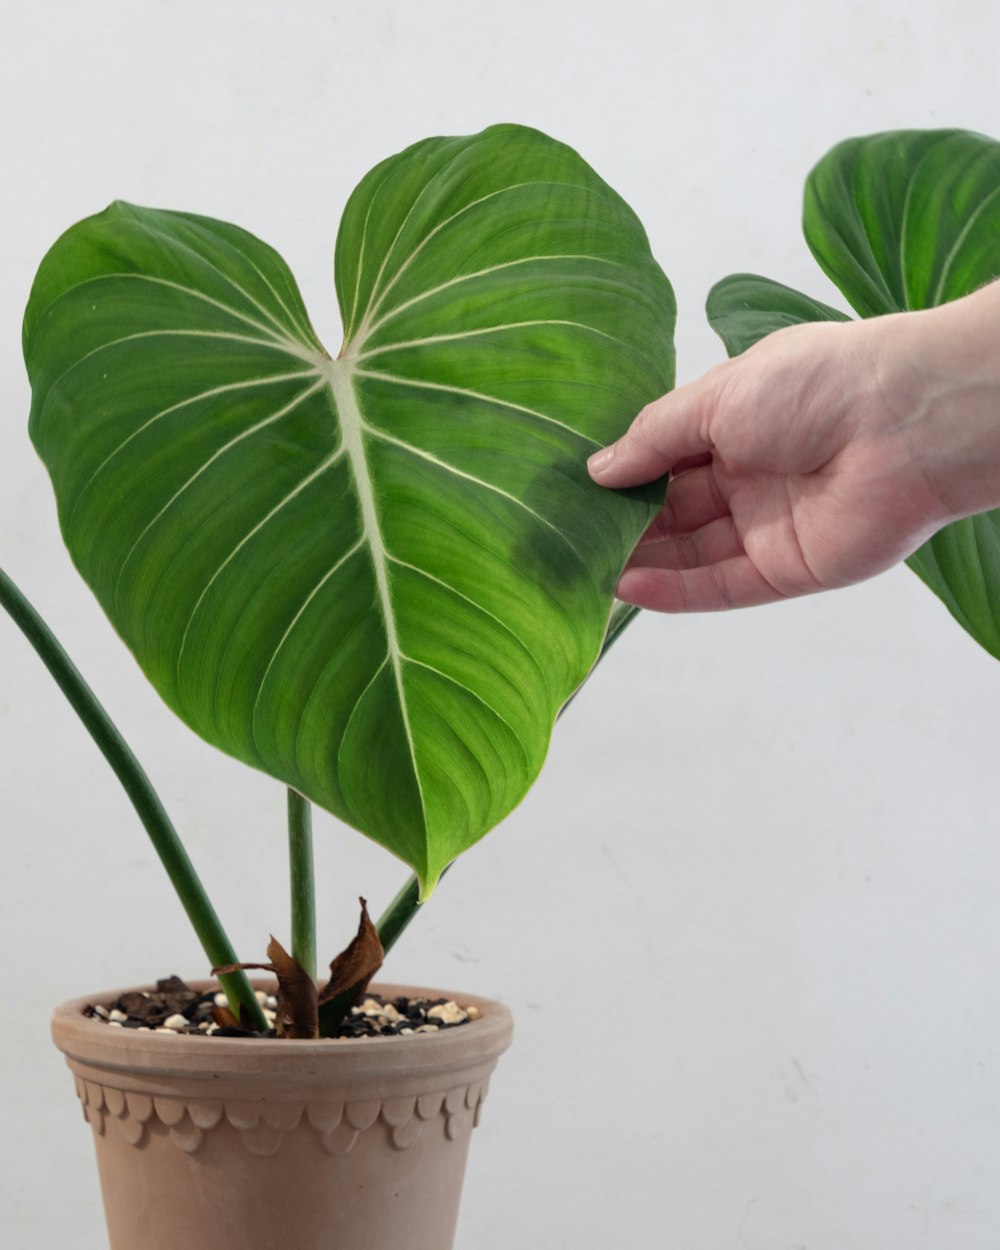 a person is holding a large green plant in a pot